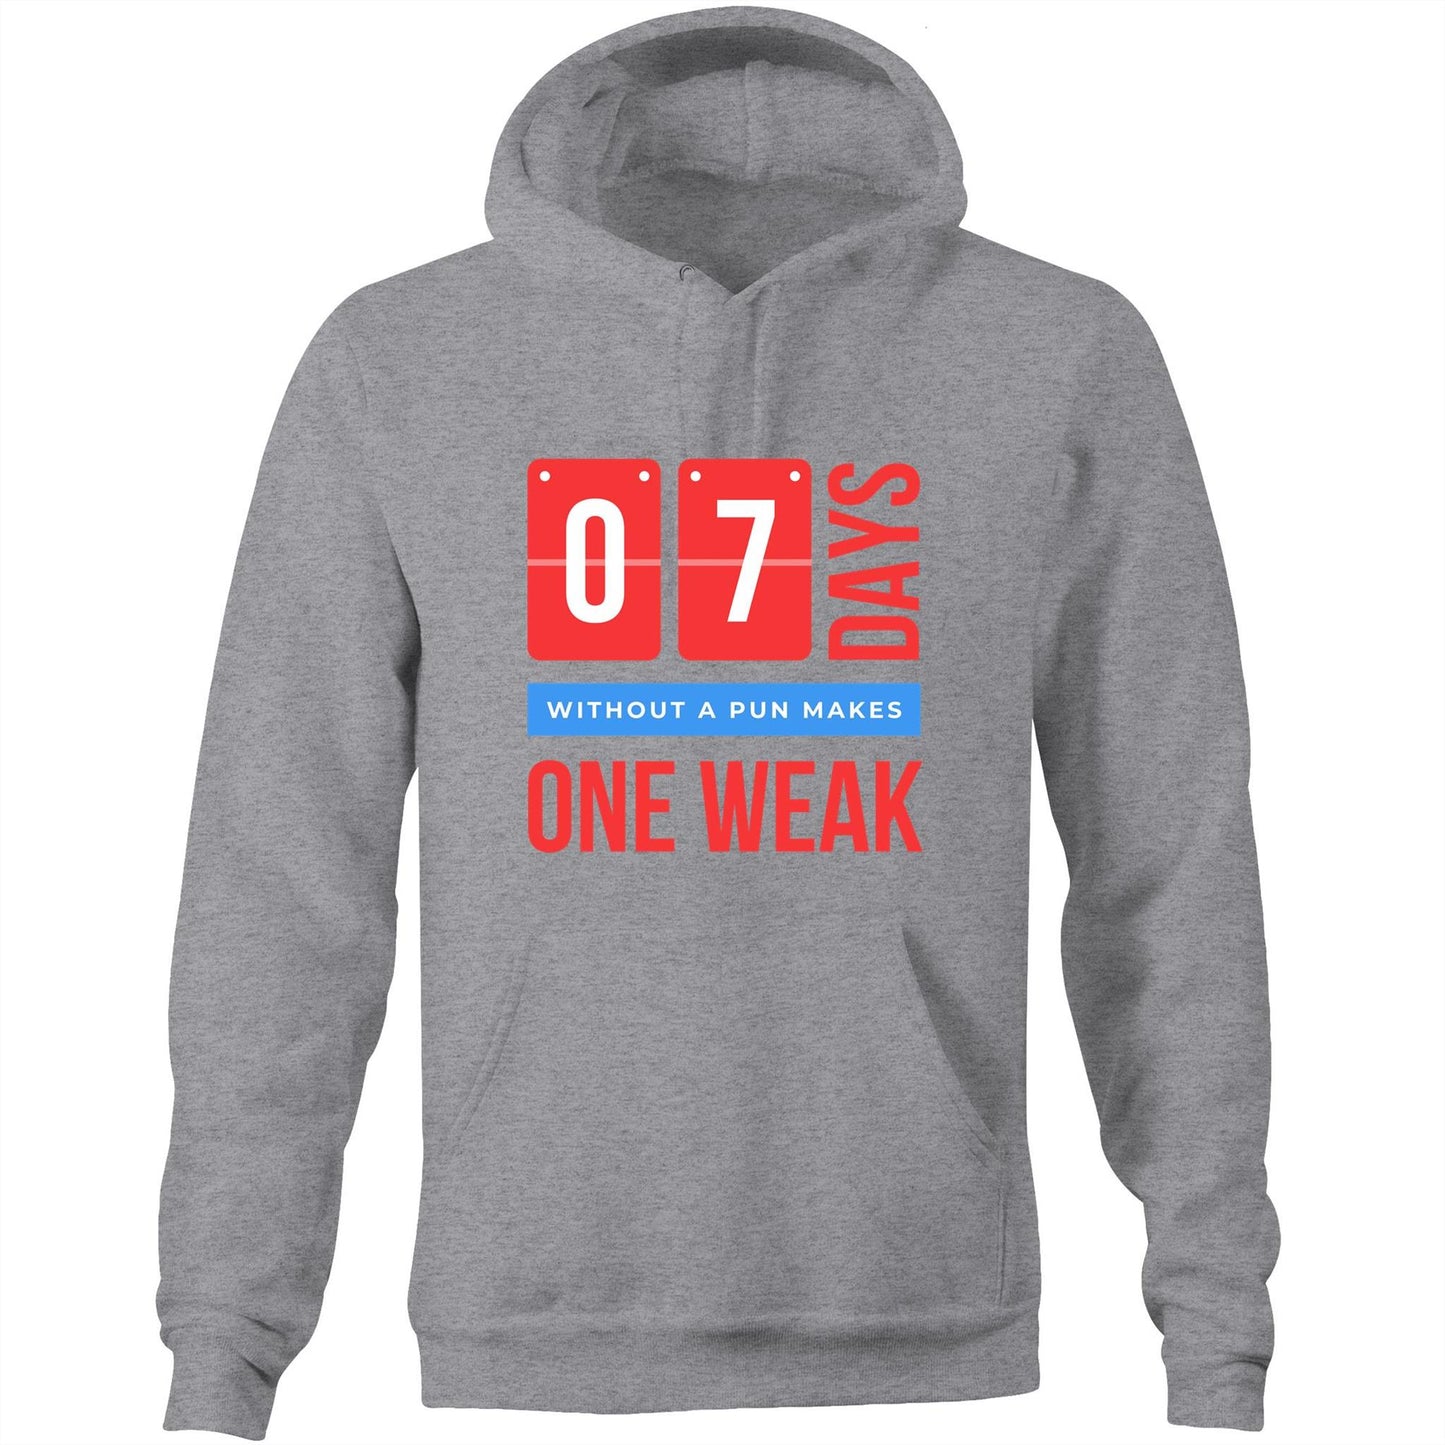 7 Days Without A Pun - Pocket Hoodie Sweatshirt Grey Marle Heavyweight Hoodie Funny